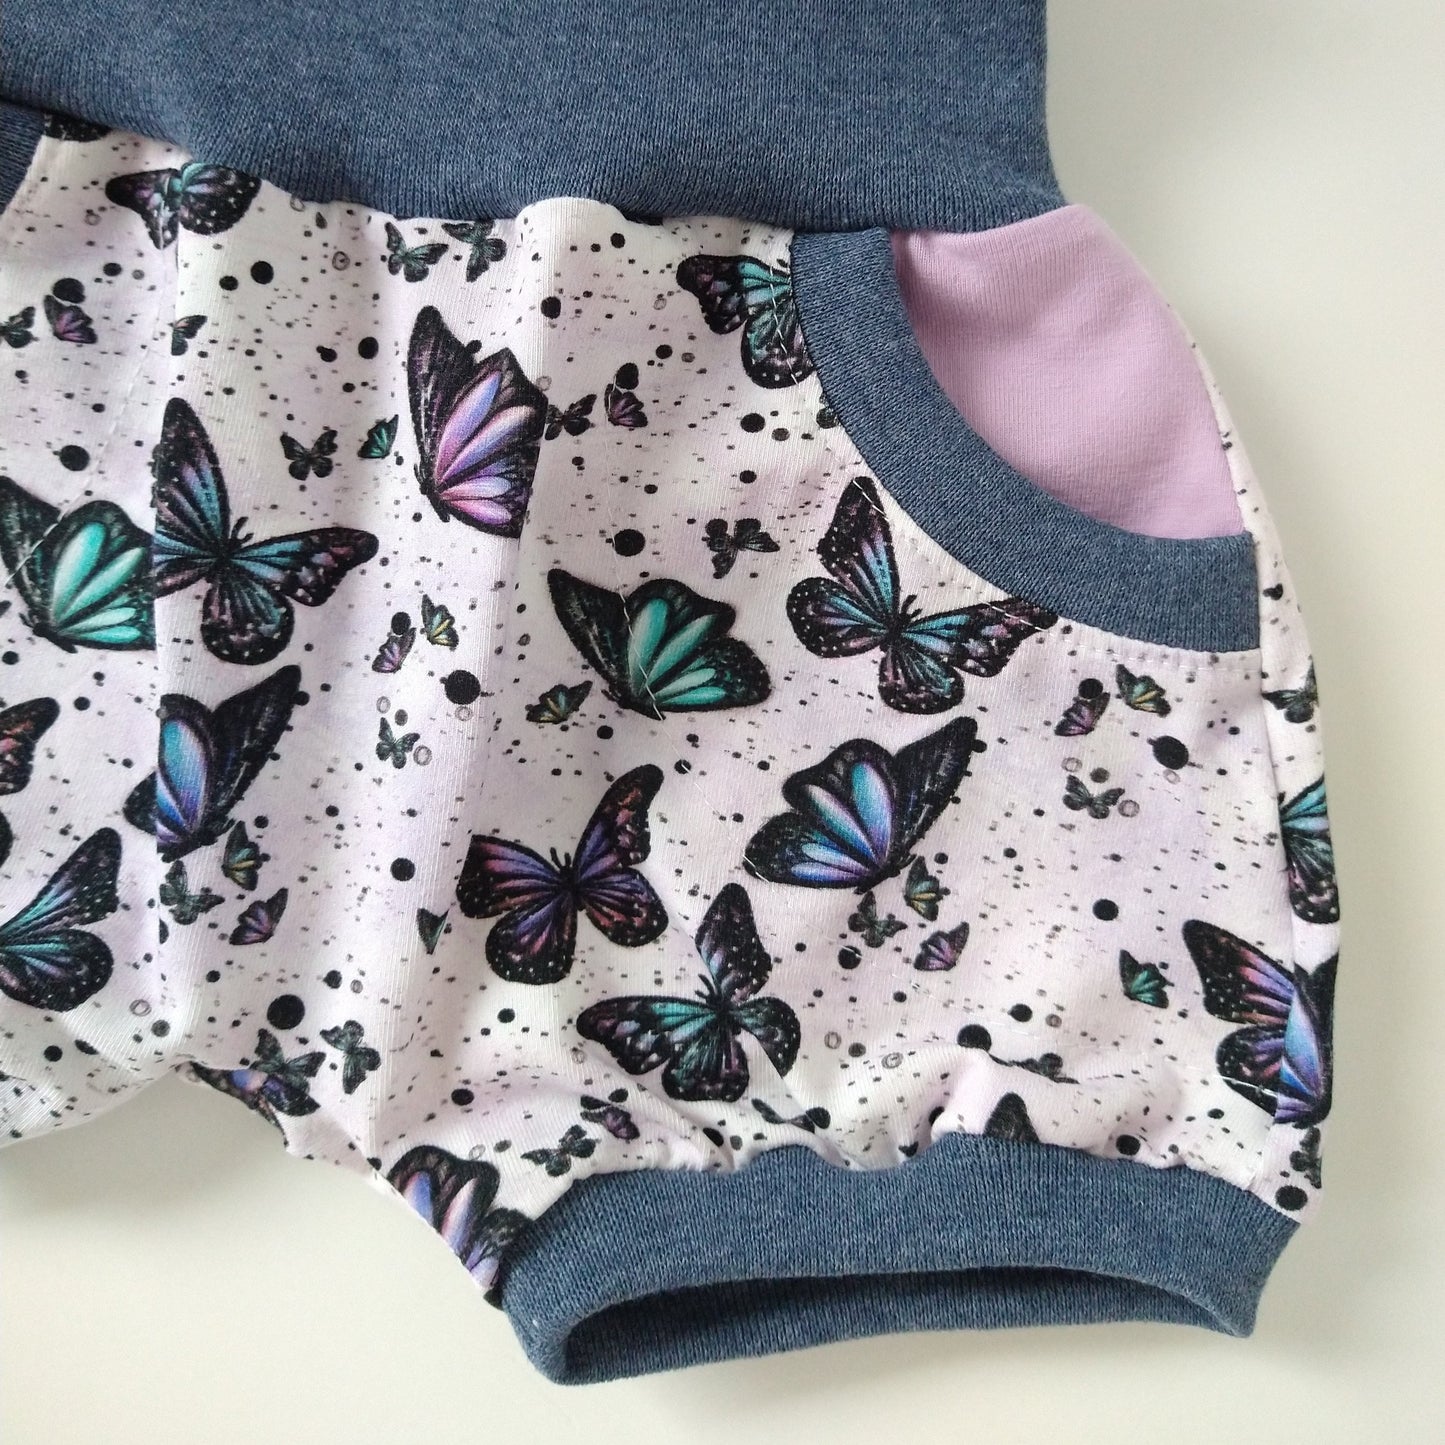 Baby summer shorts, size EUR 74 cm / US 7-9 months, purple butterfly mix and match (Handmade in Canada)